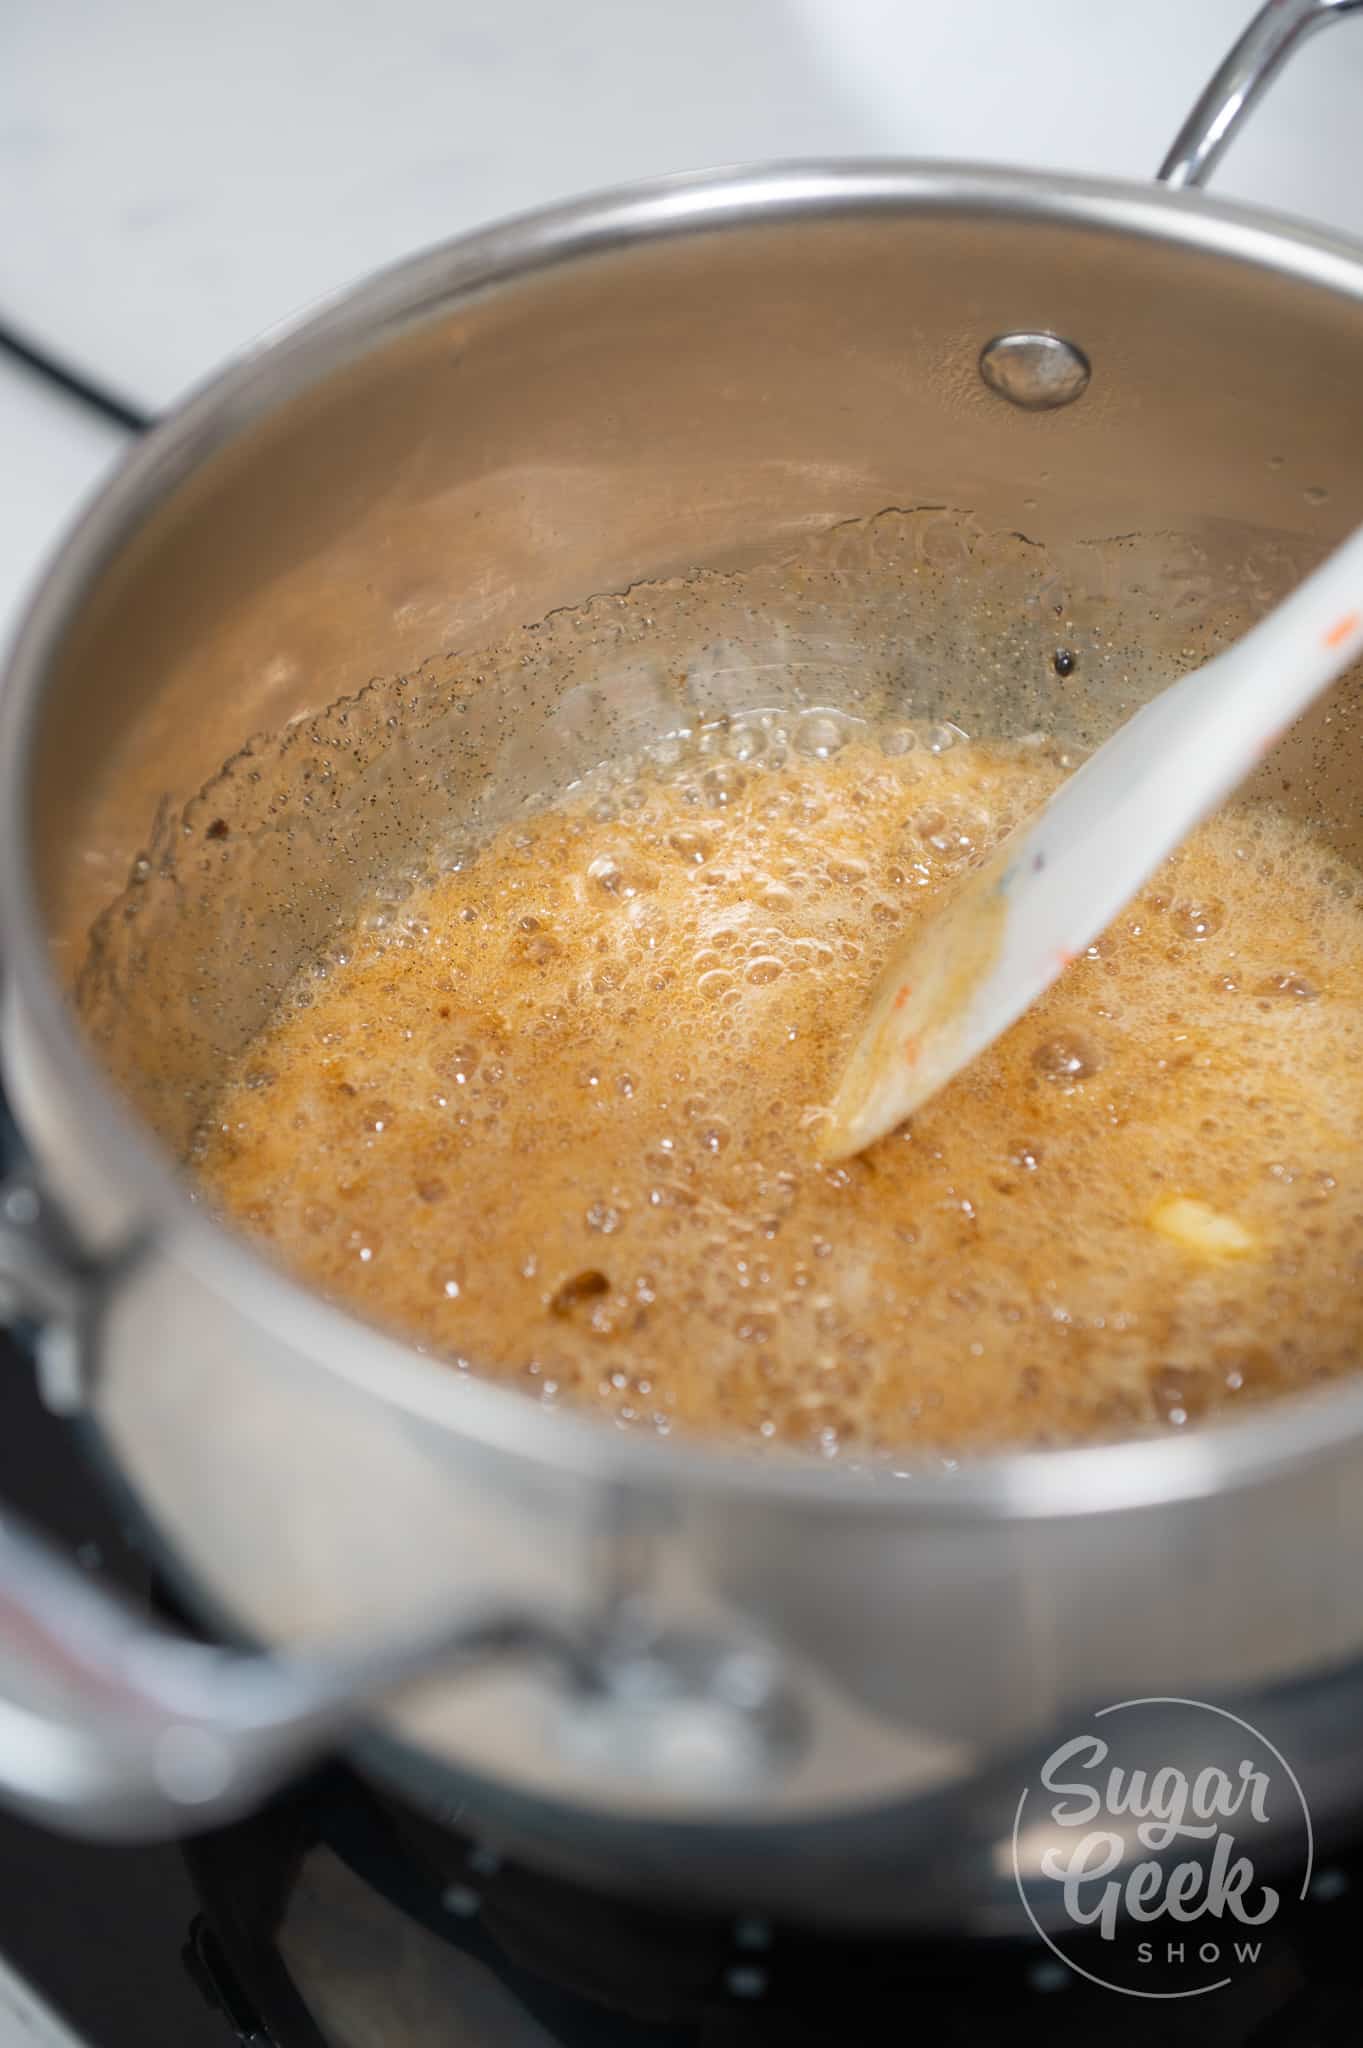 picture of sugar and honey mixture cooking in saucepan.